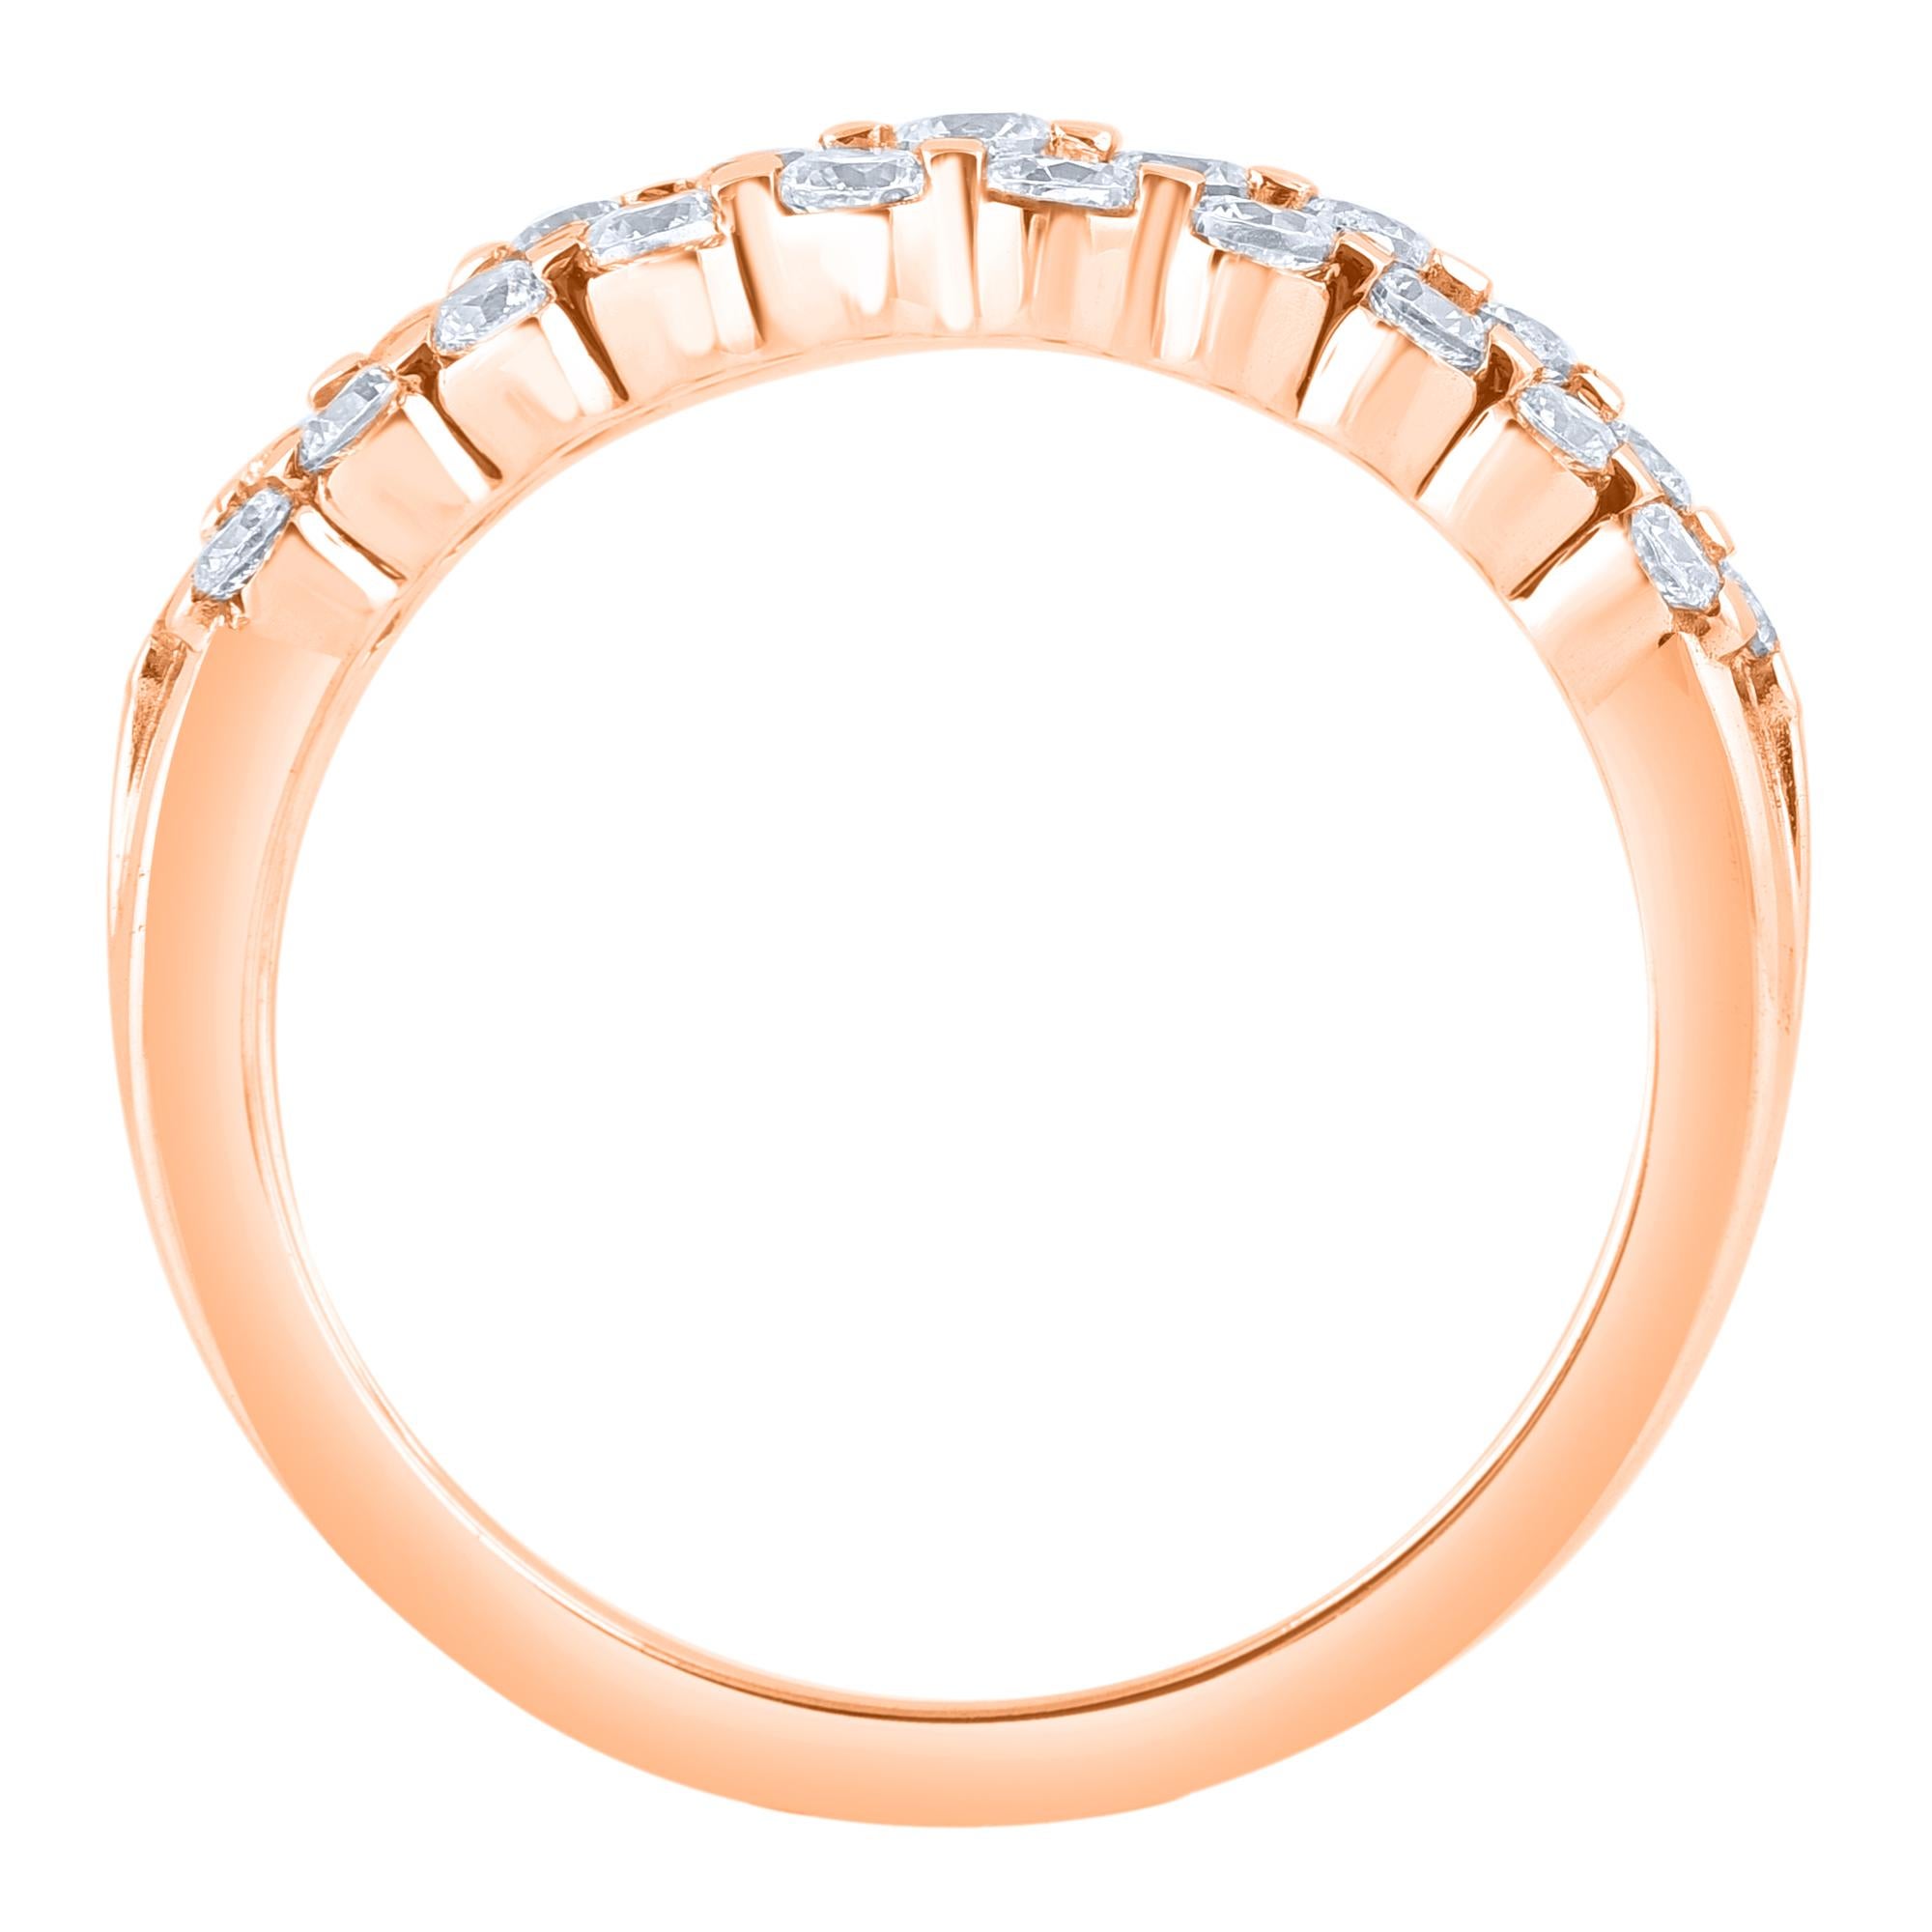 Make your most special and precious day shine with this wedding band ring. Beautifully crafted by our inhouse experts in 14 karat rose gold and embellished with 31 brilliant cut round diamonds set in channel setting. Total diamond weight is 1.0